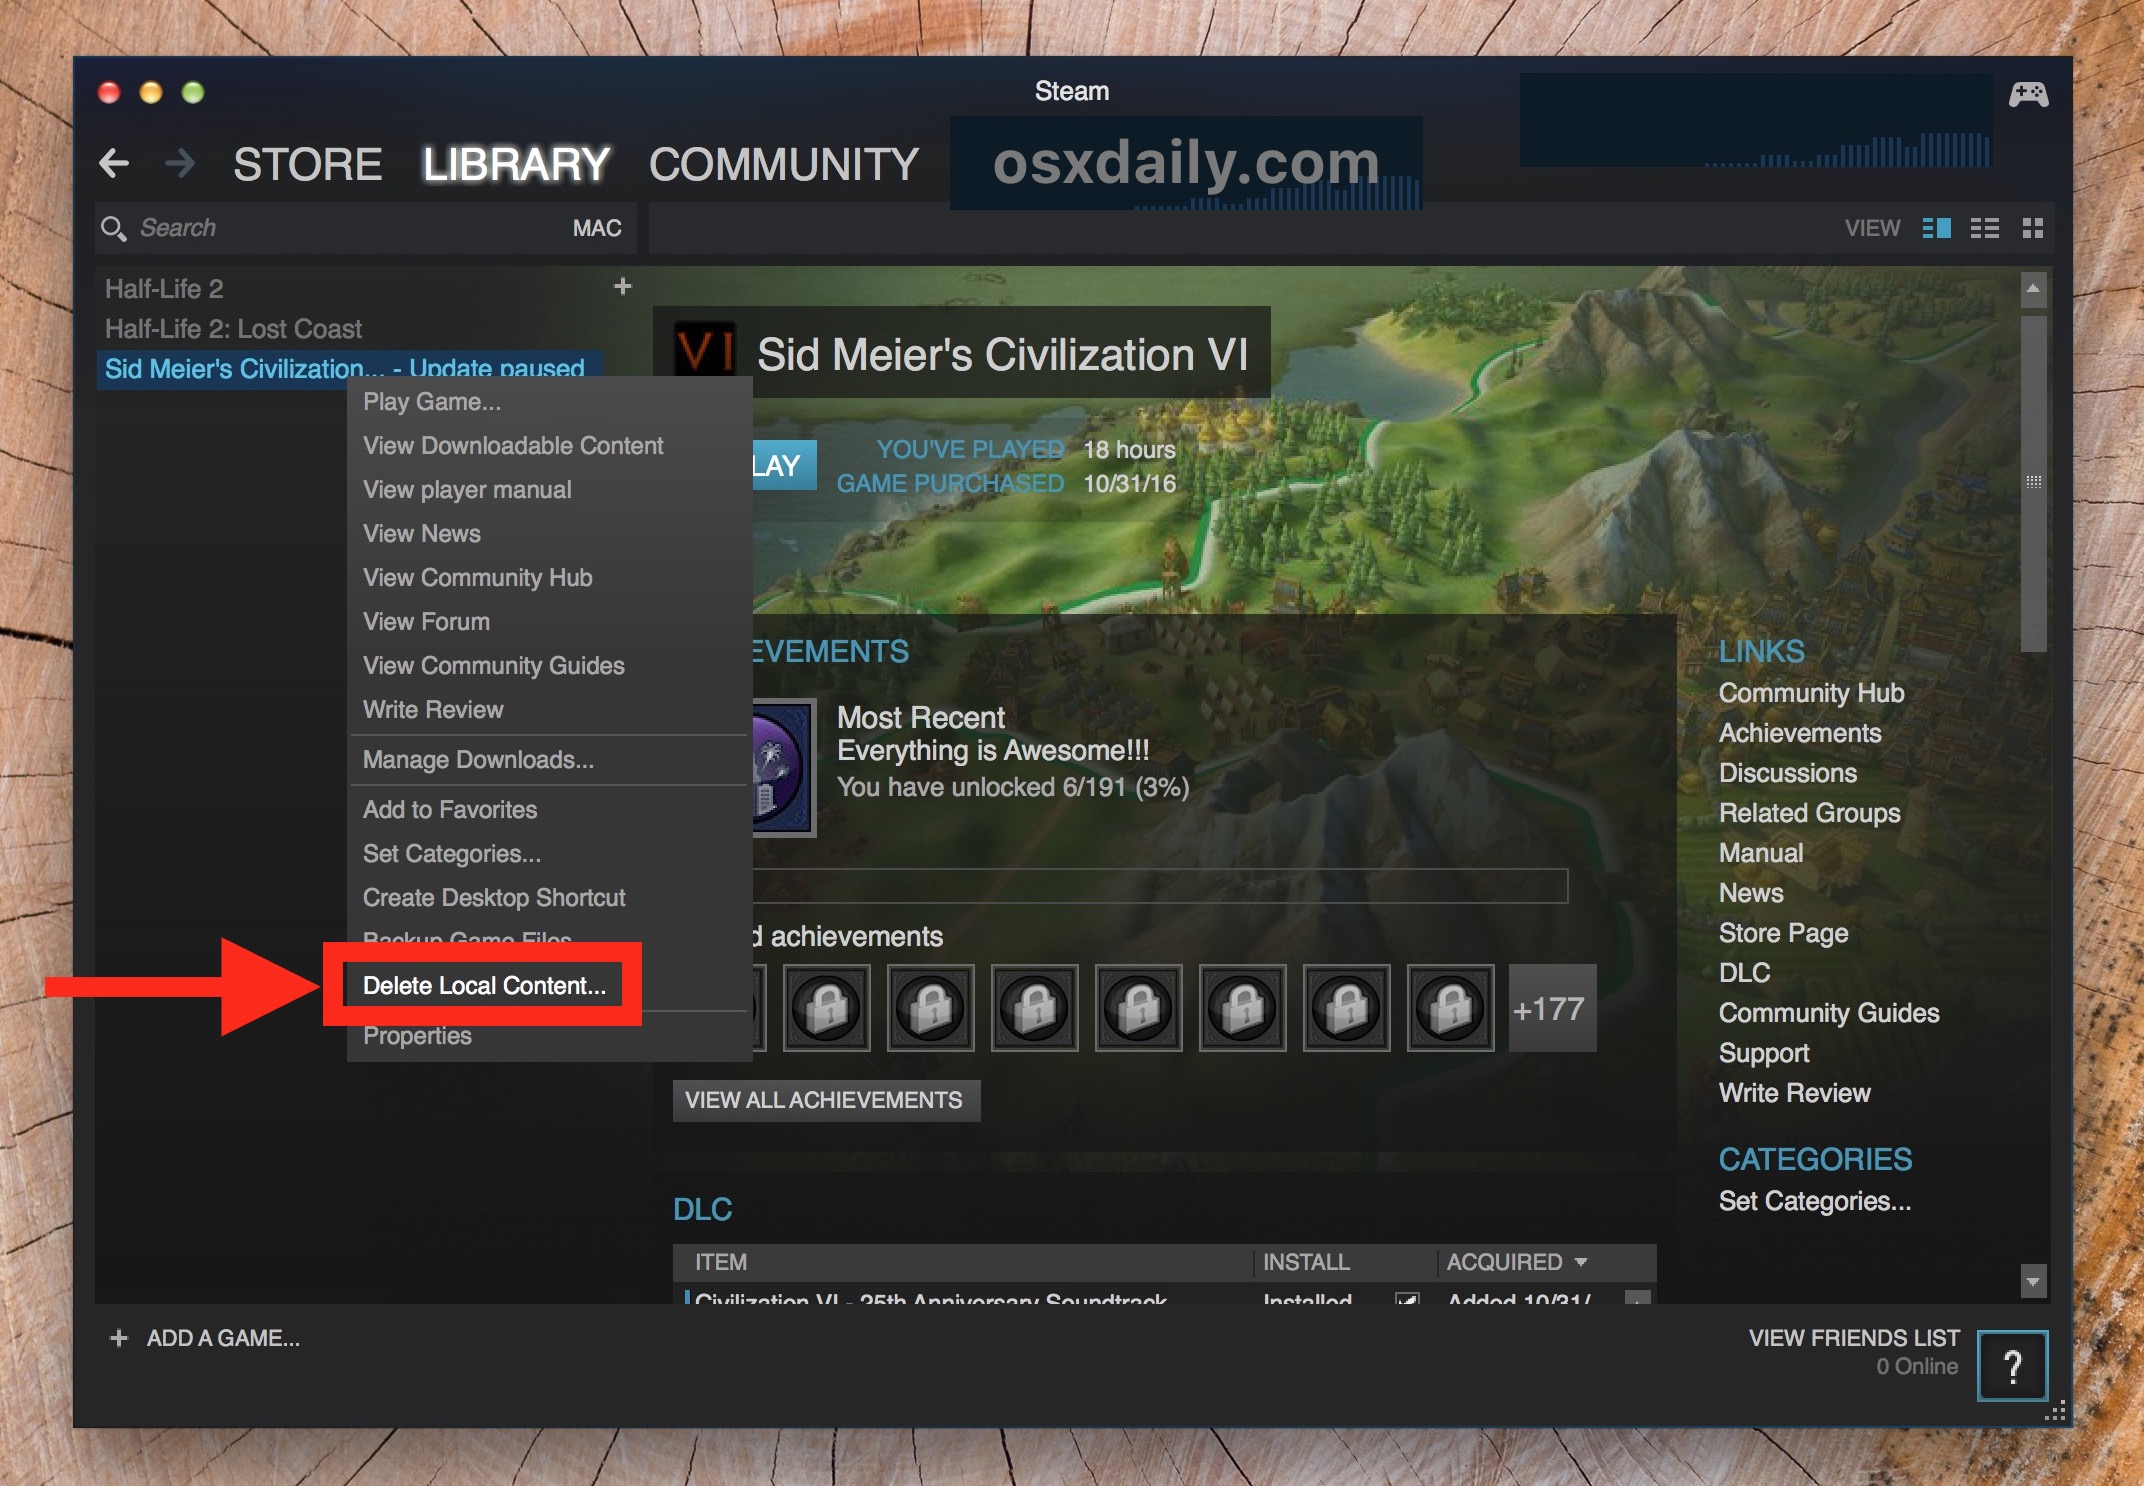 Uninstall the game from your computer through the Control Panel or by right-clicking the game in your Steam library and selecting "Delete Local Content."
Download and install the game again.